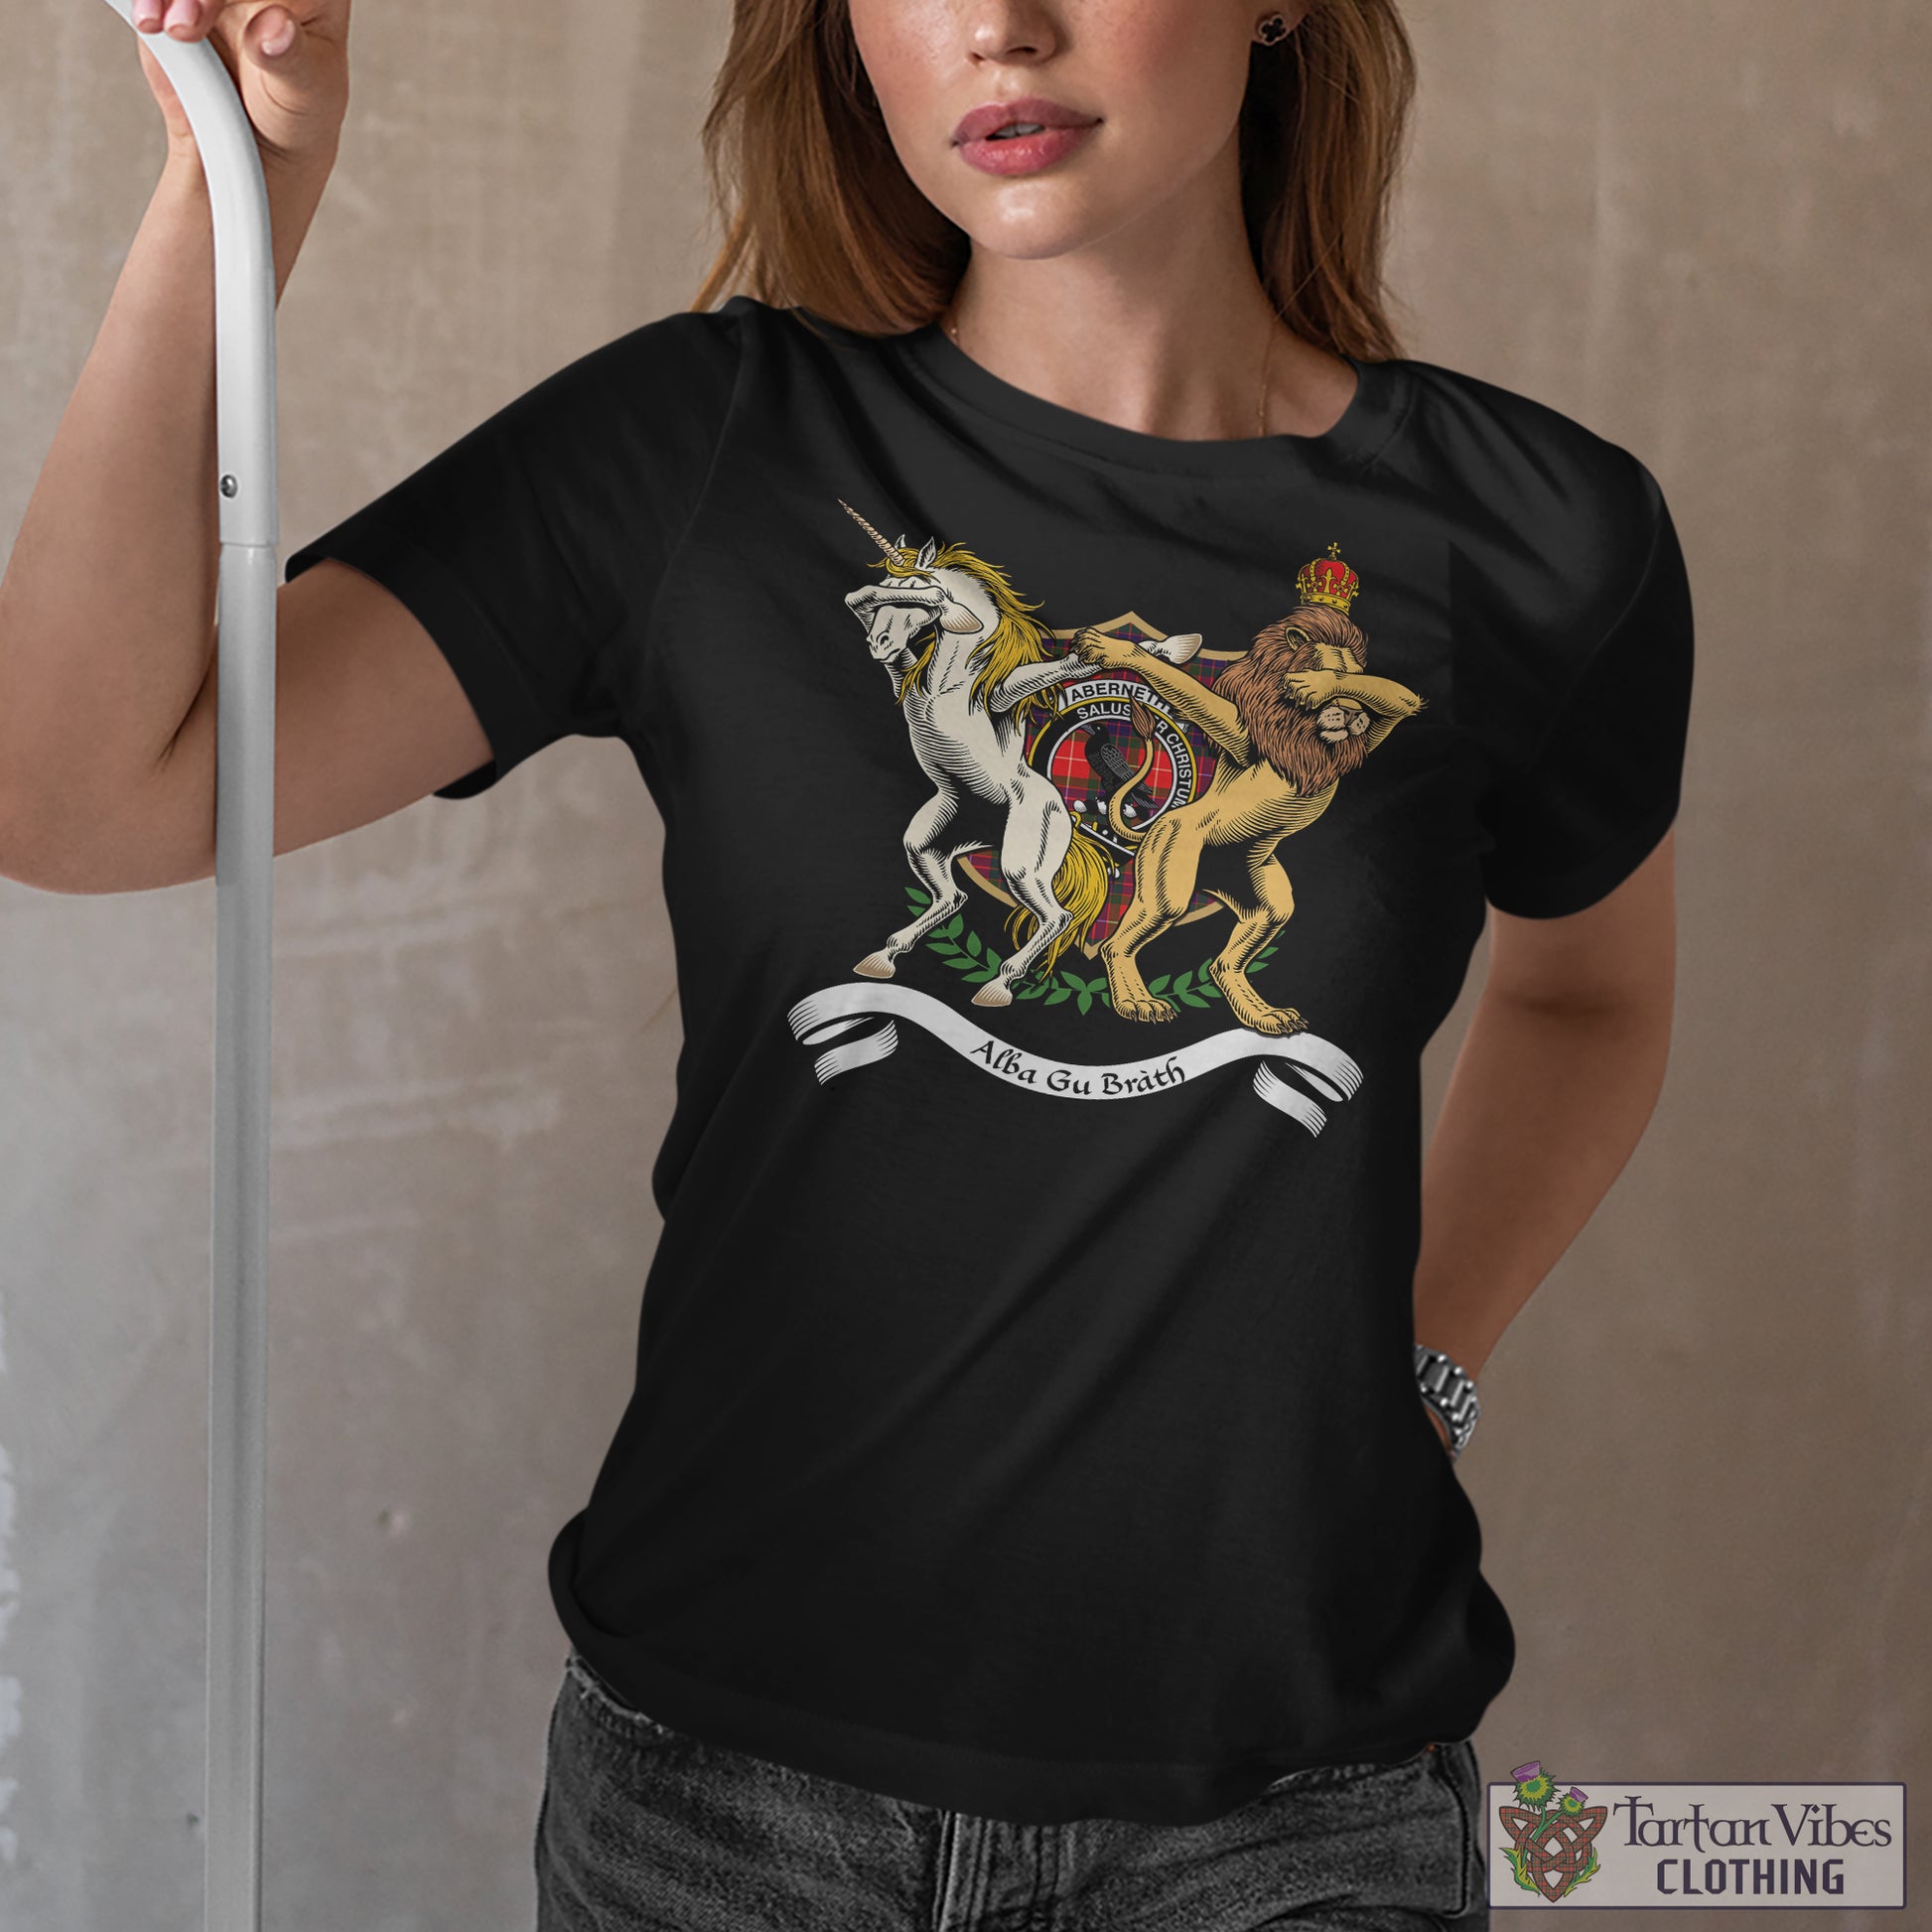 Tartan Vibes Clothing Abernethy Family Crest Cotton Women's T-Shirt with Scotland Royal Coat Of Arm Funny Style